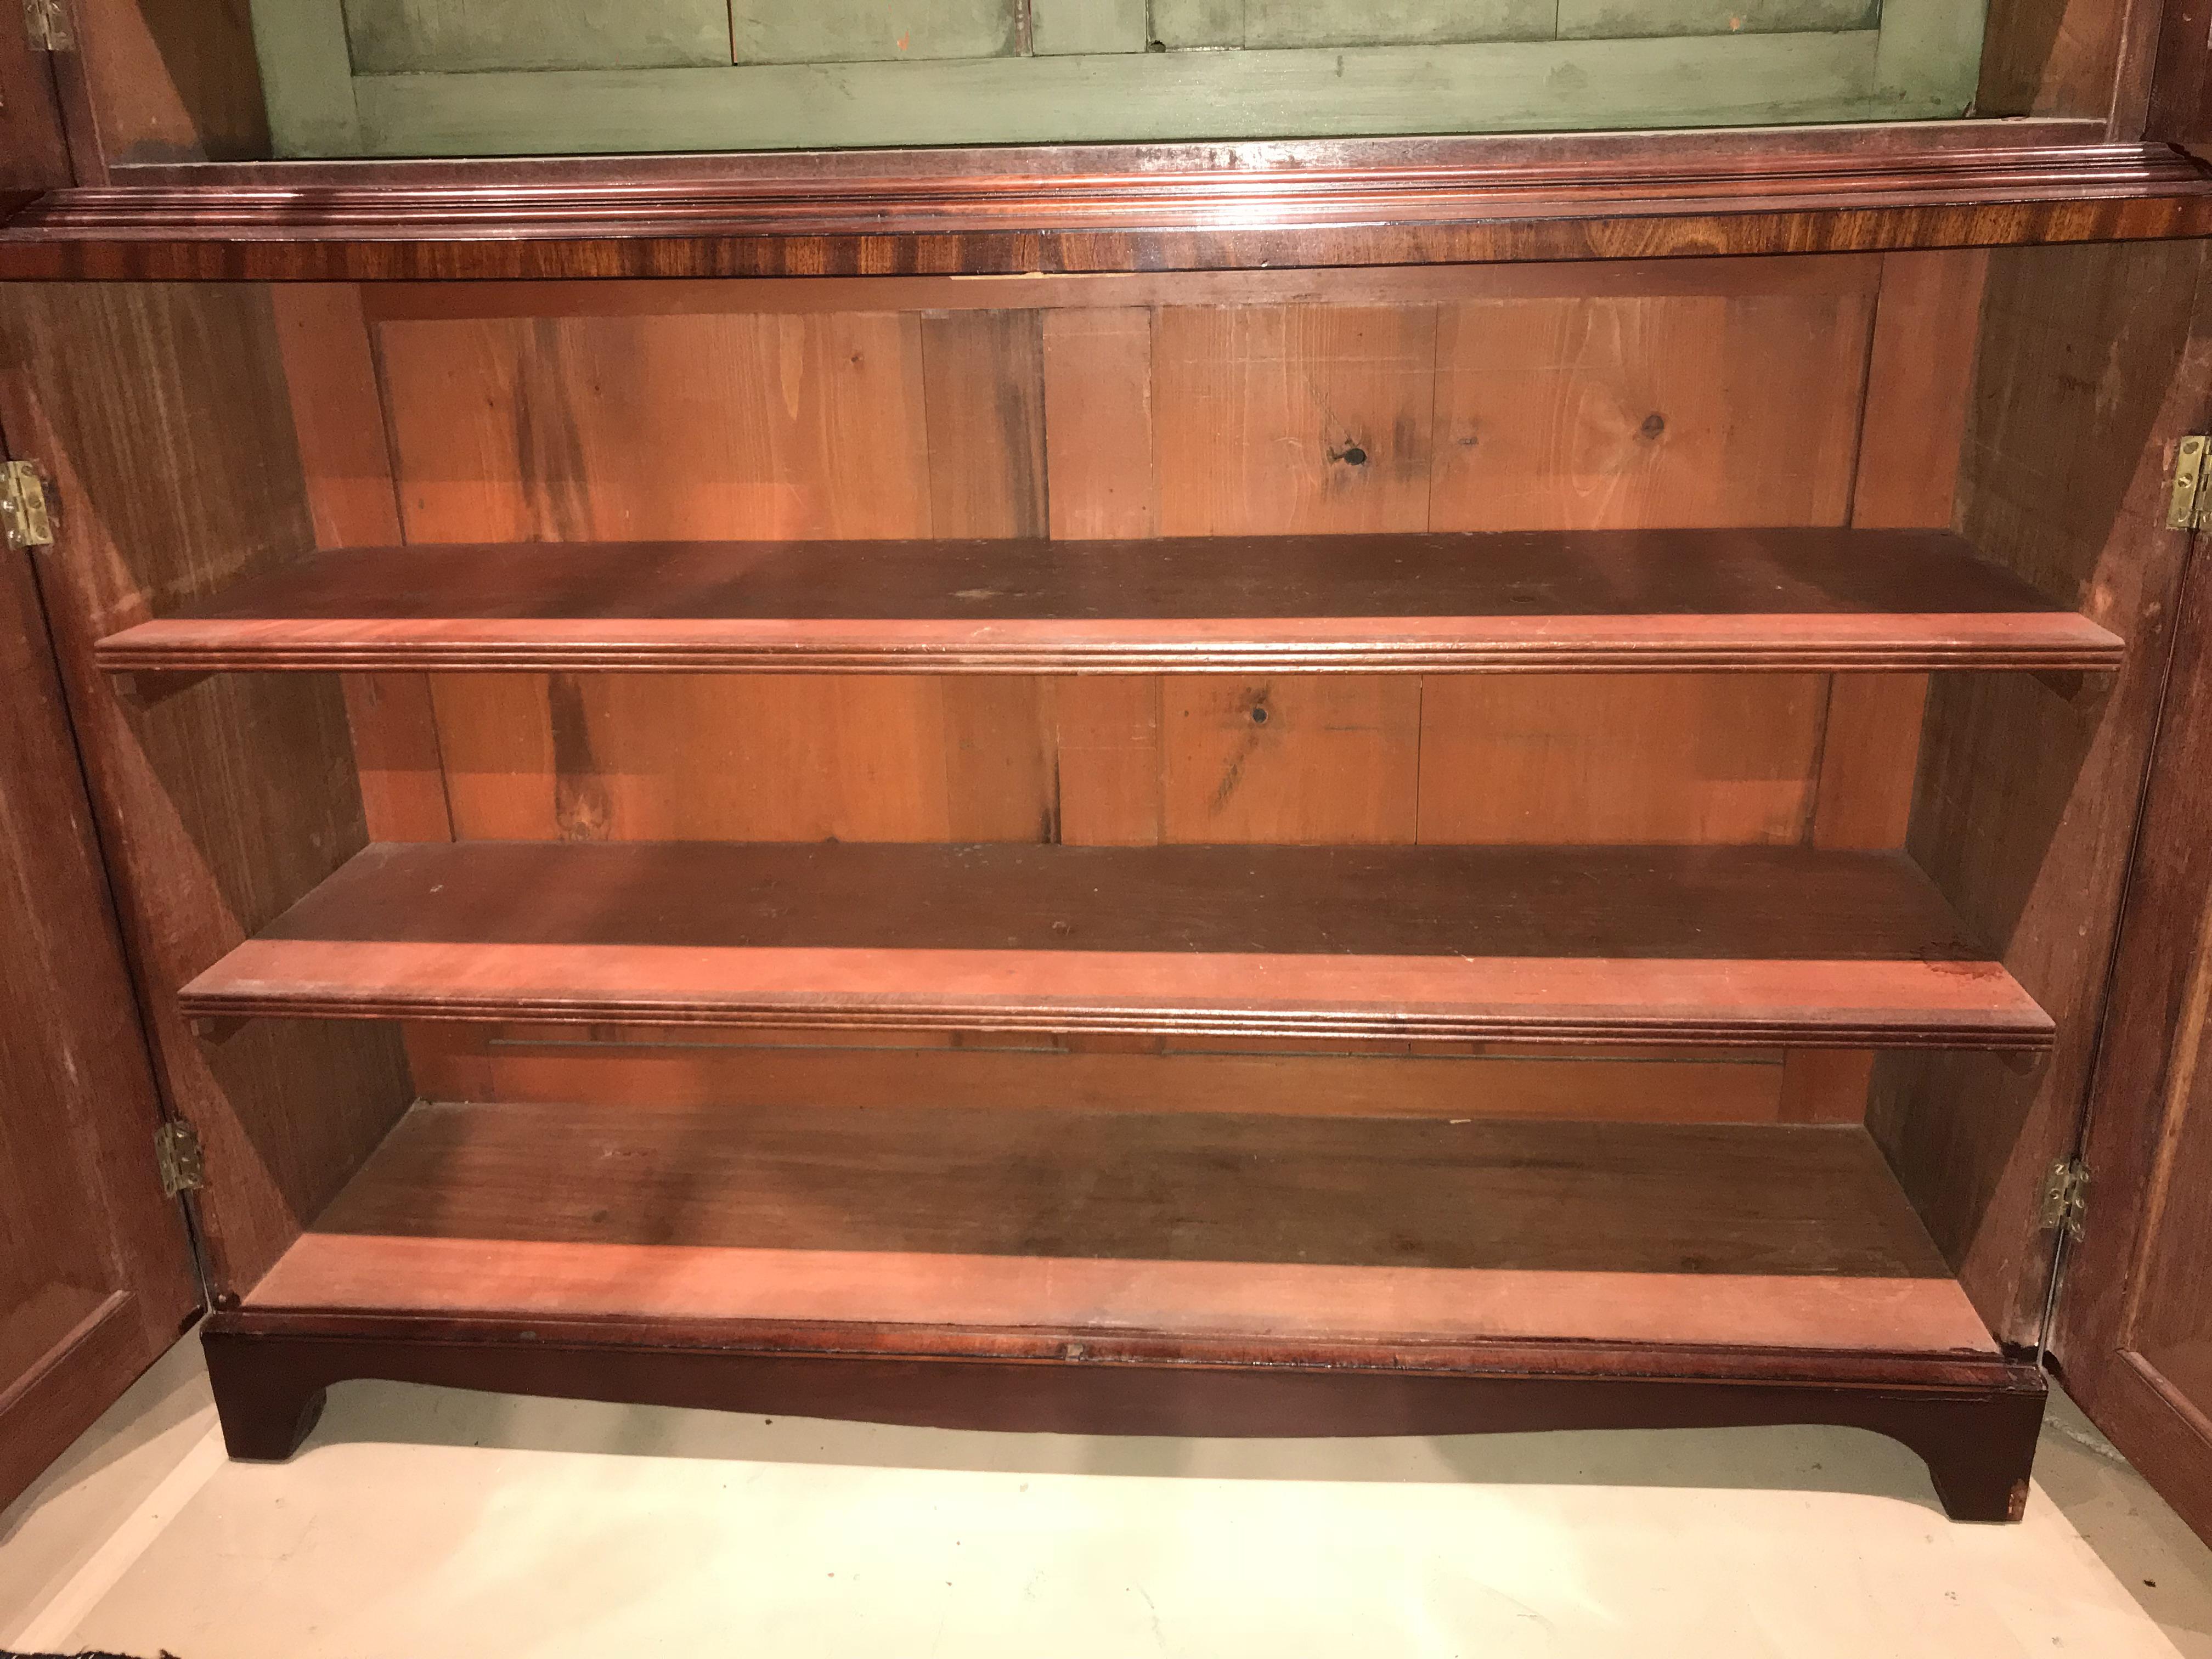 19th Century English Georgian Mahogany Two Part Bookcase or China Cabinet with Glazed Doors